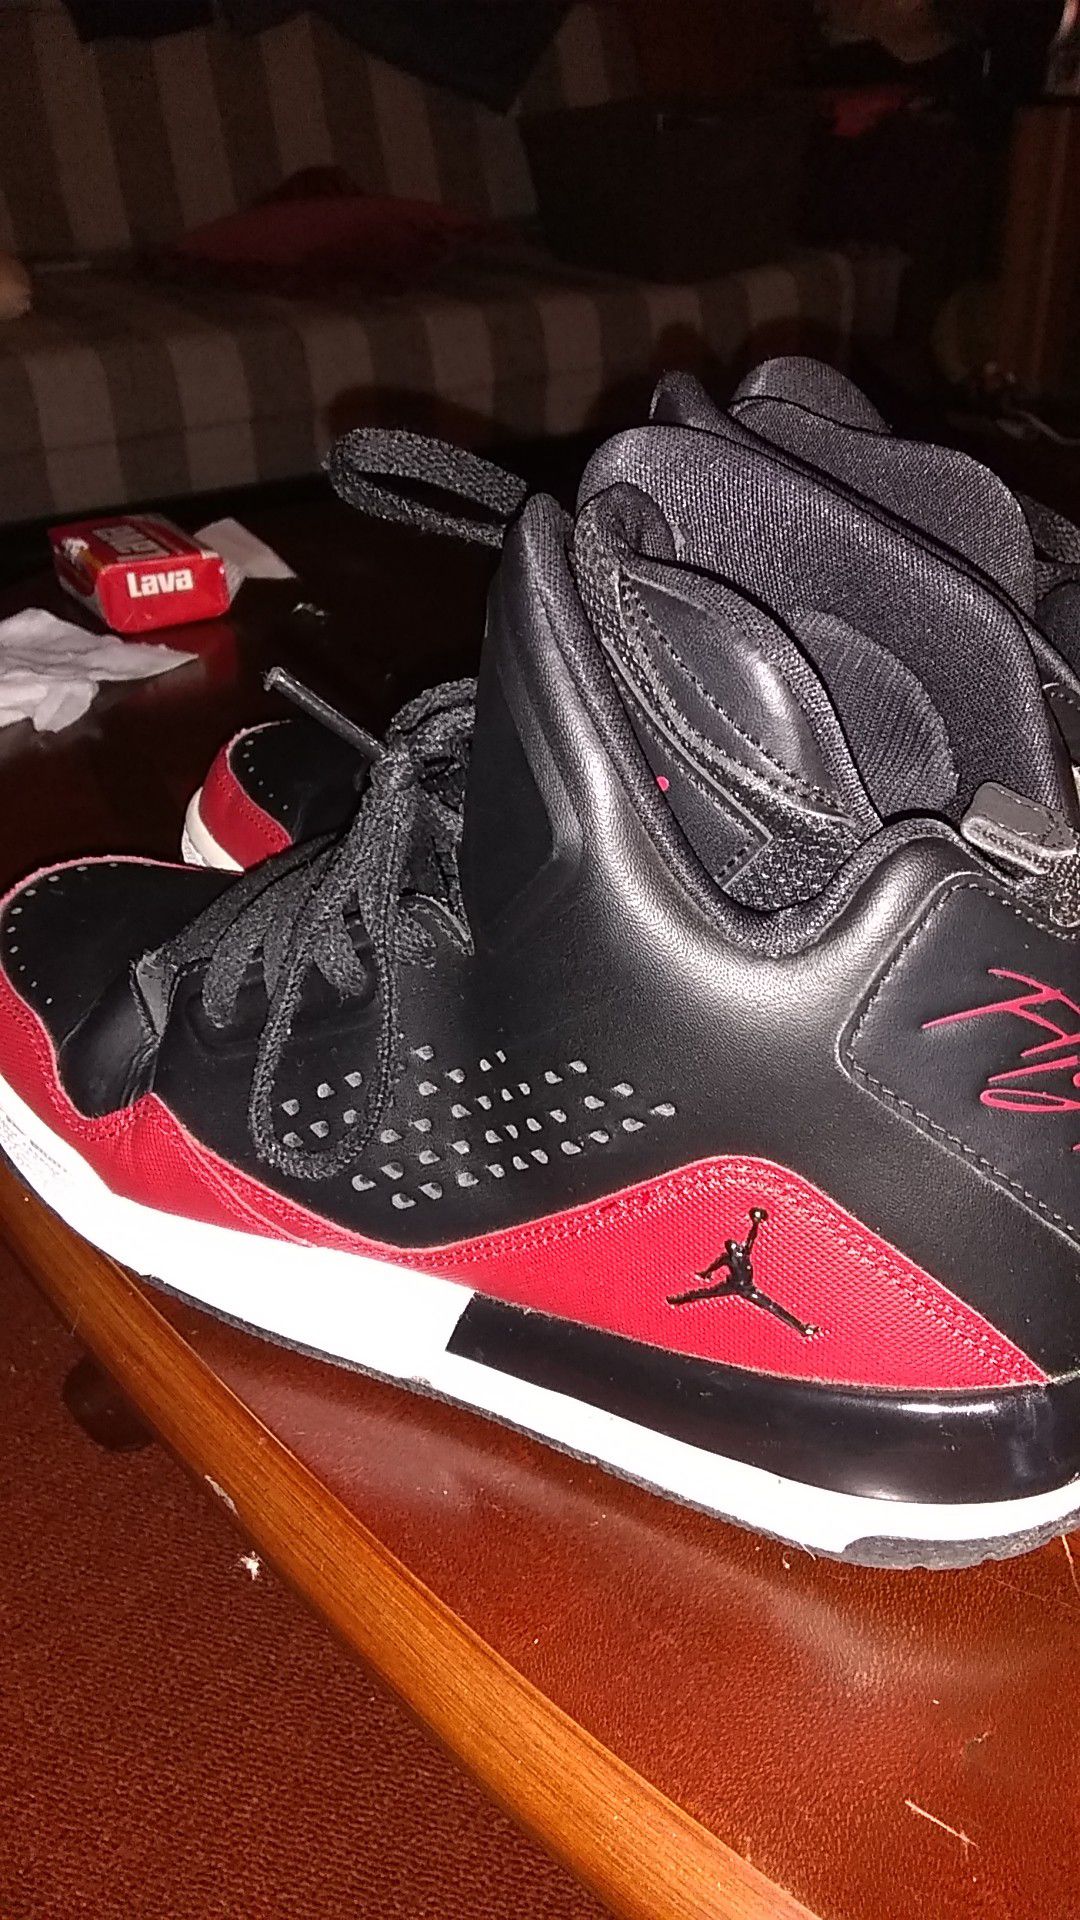 !!!JORDANS !!! SIZE 7 AWESOME DEAL NORMALLY $180 TODAY $75 HURRY WILL BE GONE